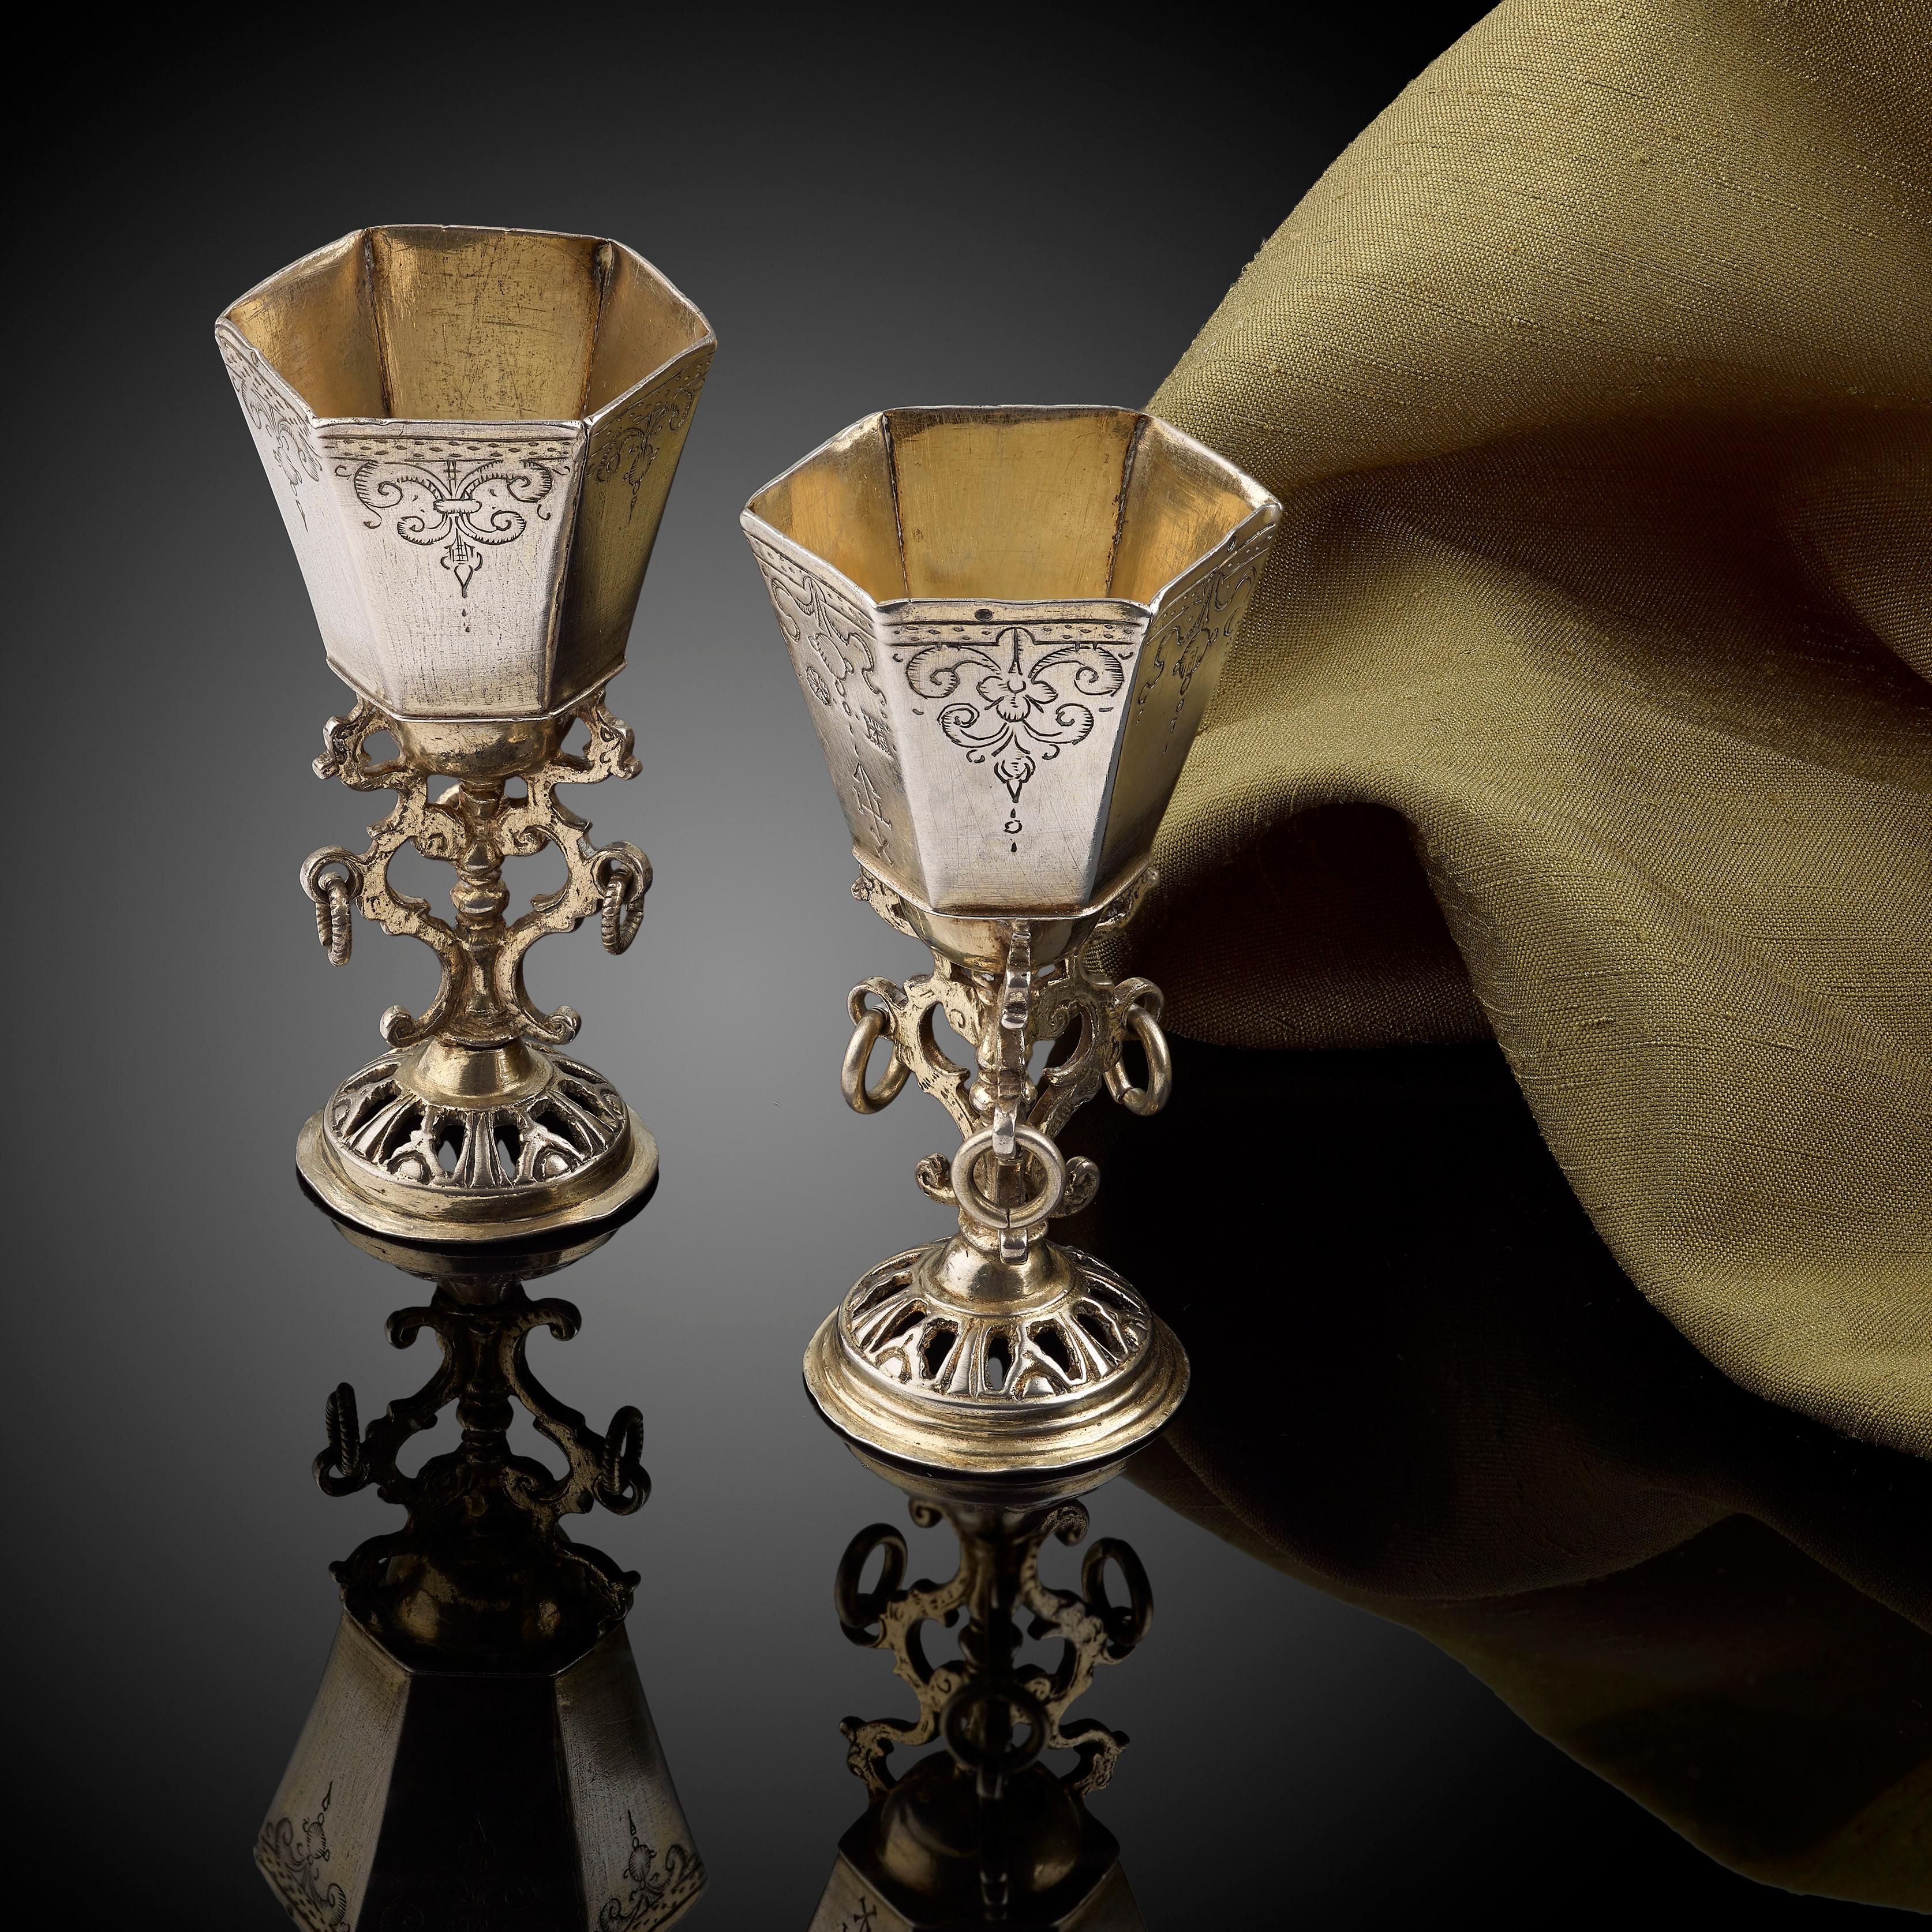 A very rare pair of engraved silver and parcel-gilt cups; circa 1630; the one marked for Norden, North Germany; maker's mark for Englebert Elders - see p.956 Scheffler, Goldschmiede Niedersachans. 

Height 6.6 cms; weight 3 ozs approximate.
 